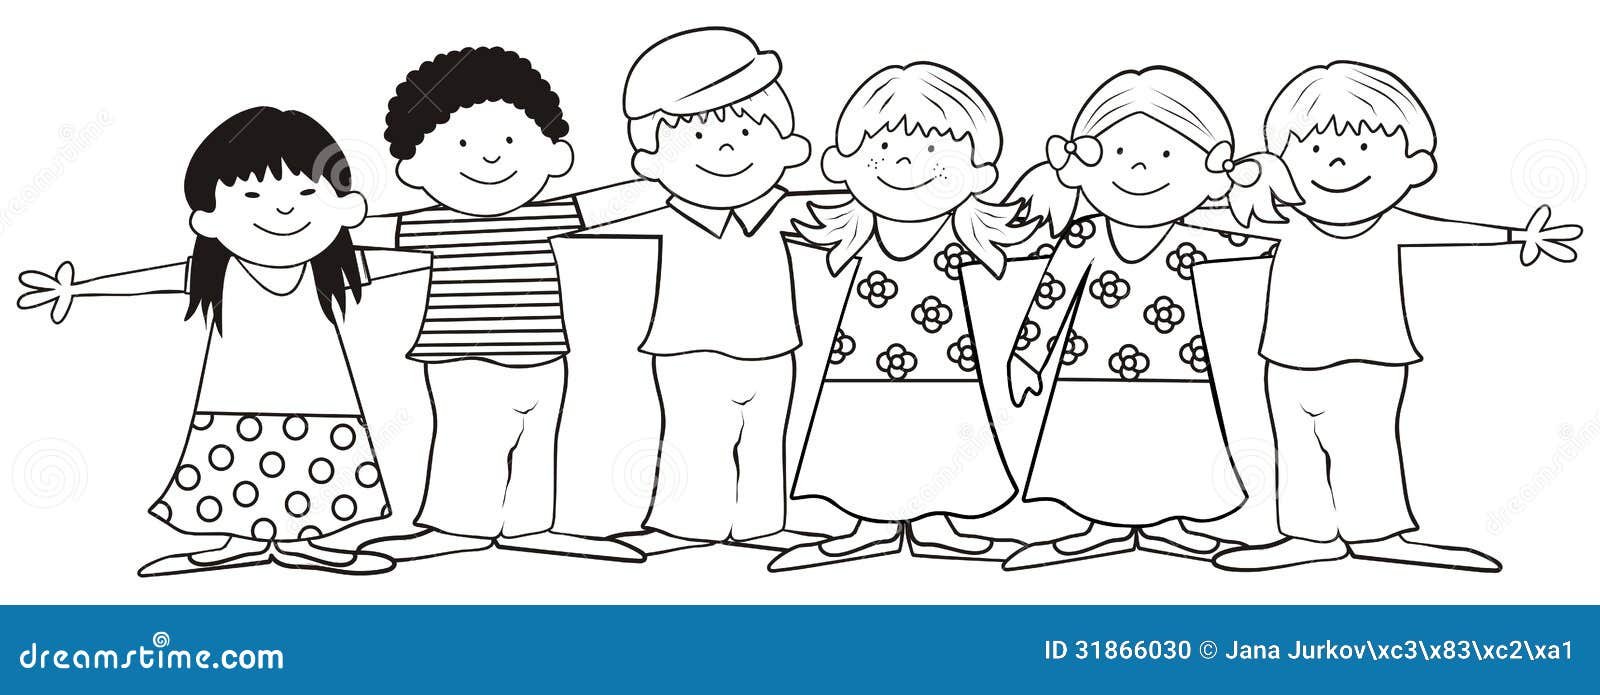 Free Coloring Kids: Childrencoloring Book Stock Photo Image: 31866030